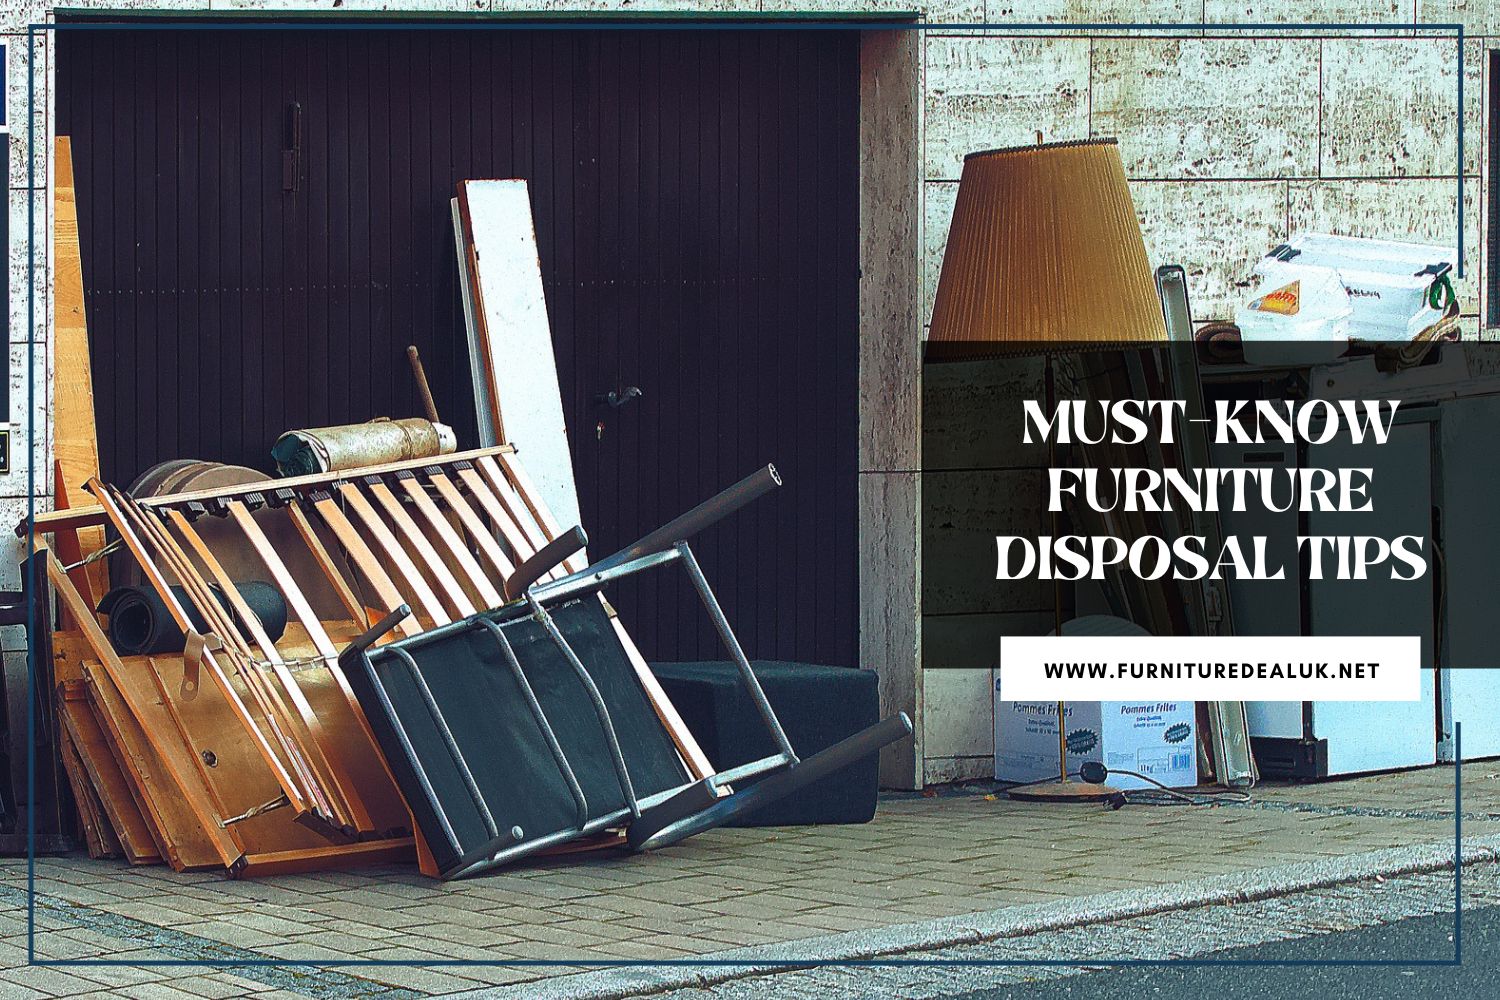 Top 3 Must-Know Furniture Disposal Tips